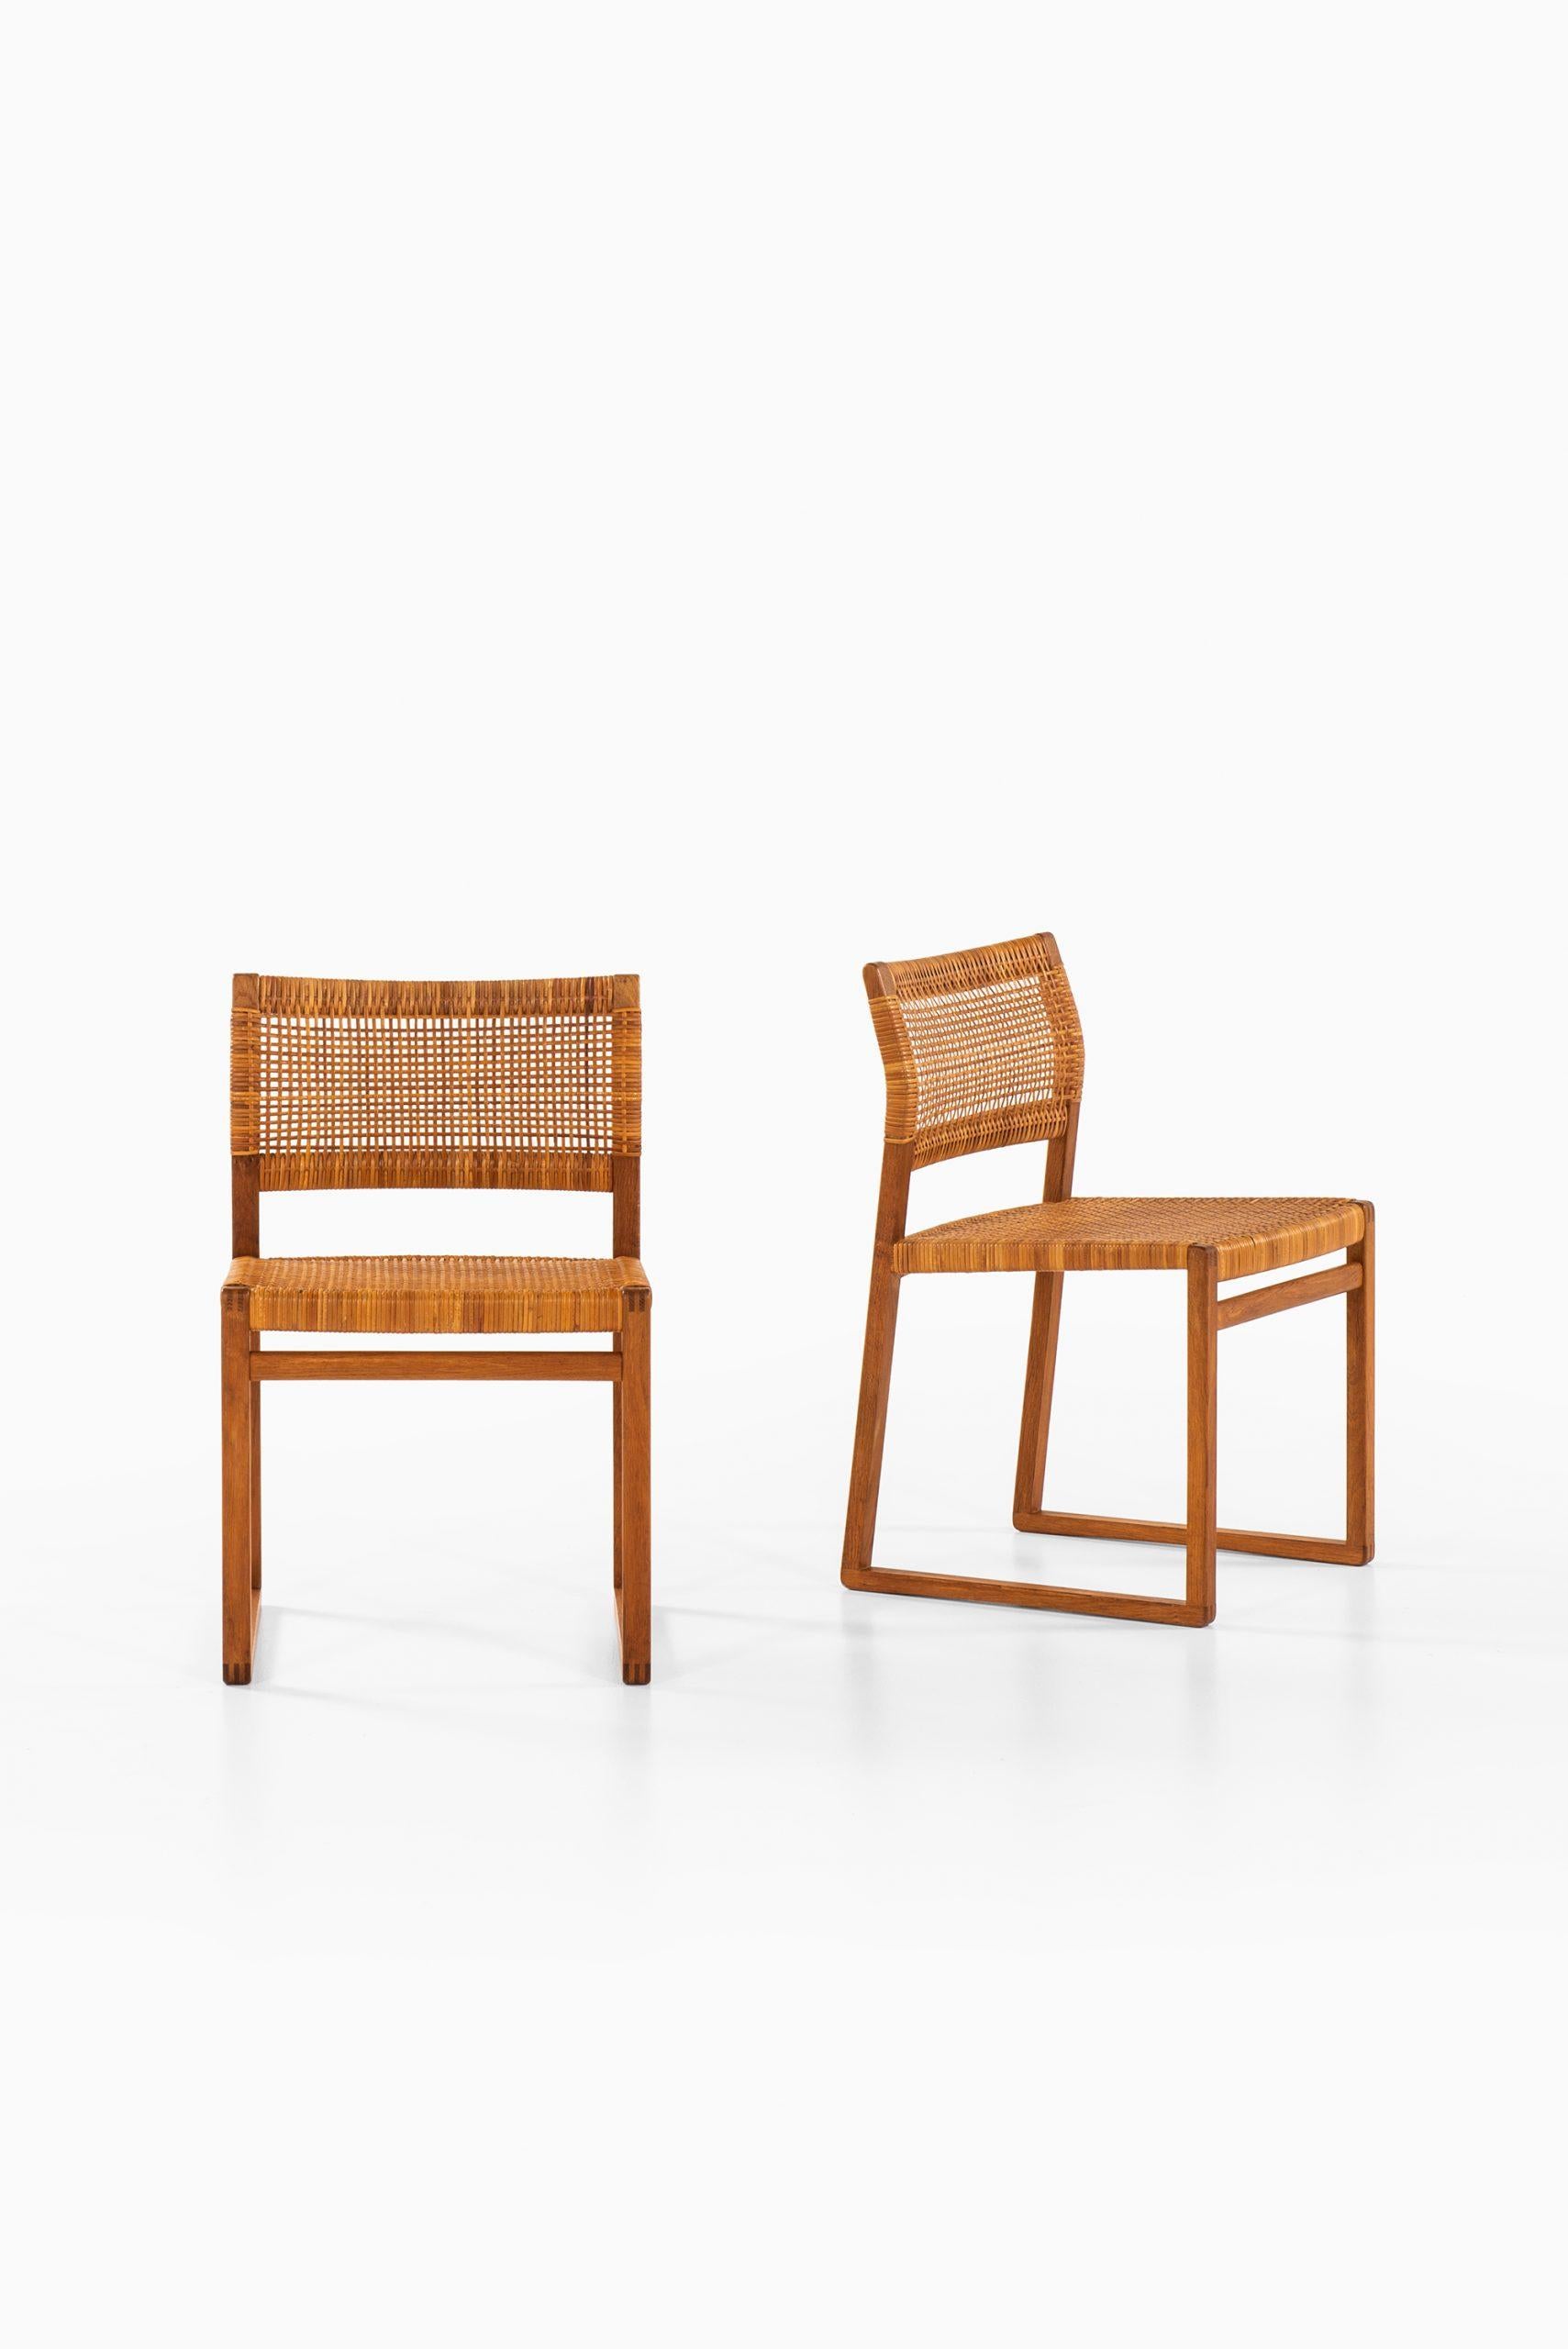 Rare set of 6 dining chairs model BM-61 and 2 armchairs model BM-62 designed by Børge Mogensen. Produced by Fredericia stolefabrik in Denmark.
Dimensions dining chairs (W x D x H): 48 x 48 x 75 cm, SH: 44 cm.
Dimensions armchair (W x D x H): 61 x